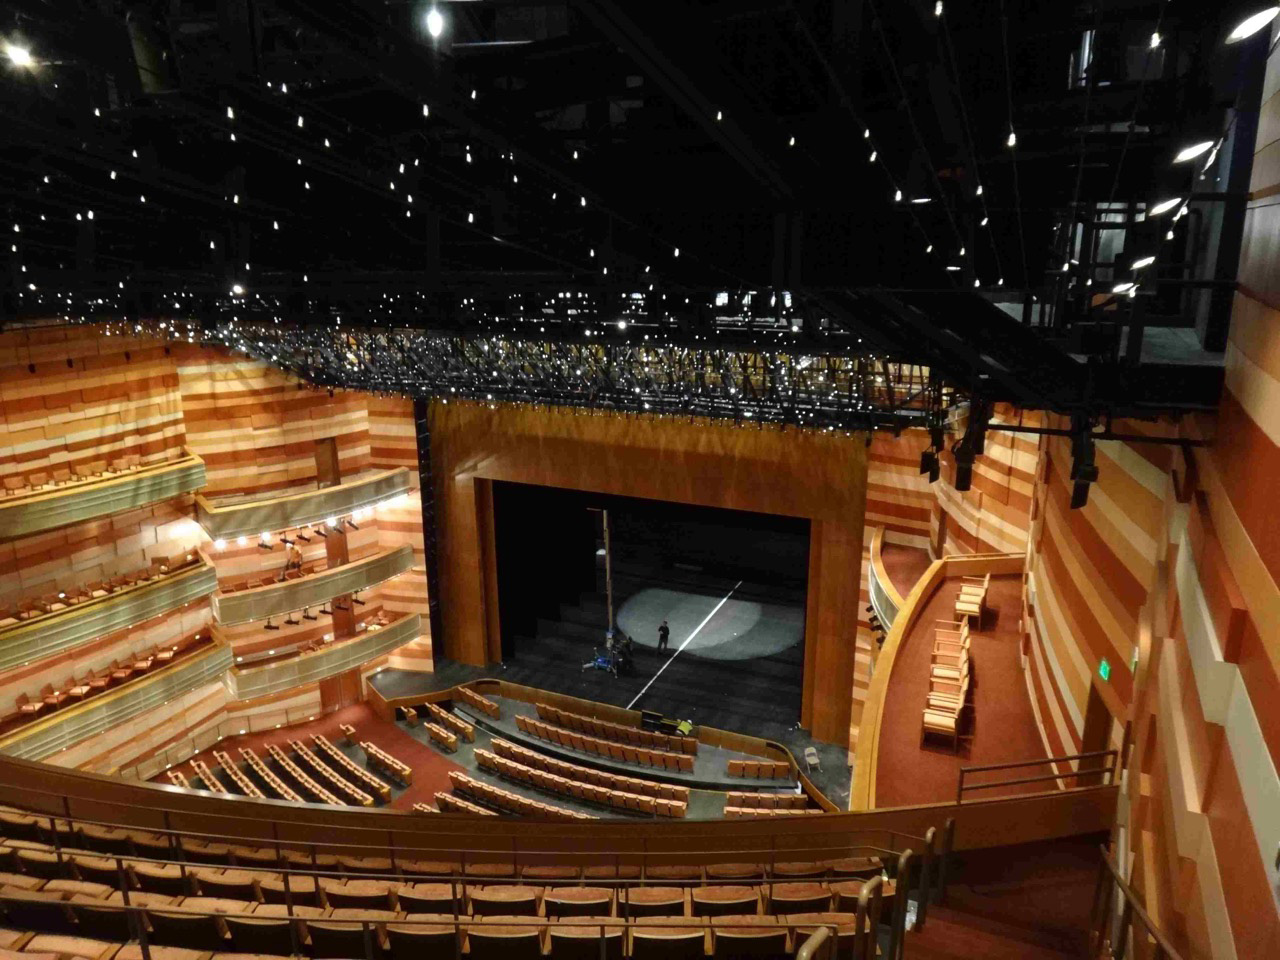 Salt Lake City's Eccles Theater A Spectacle of Sights and Sounds